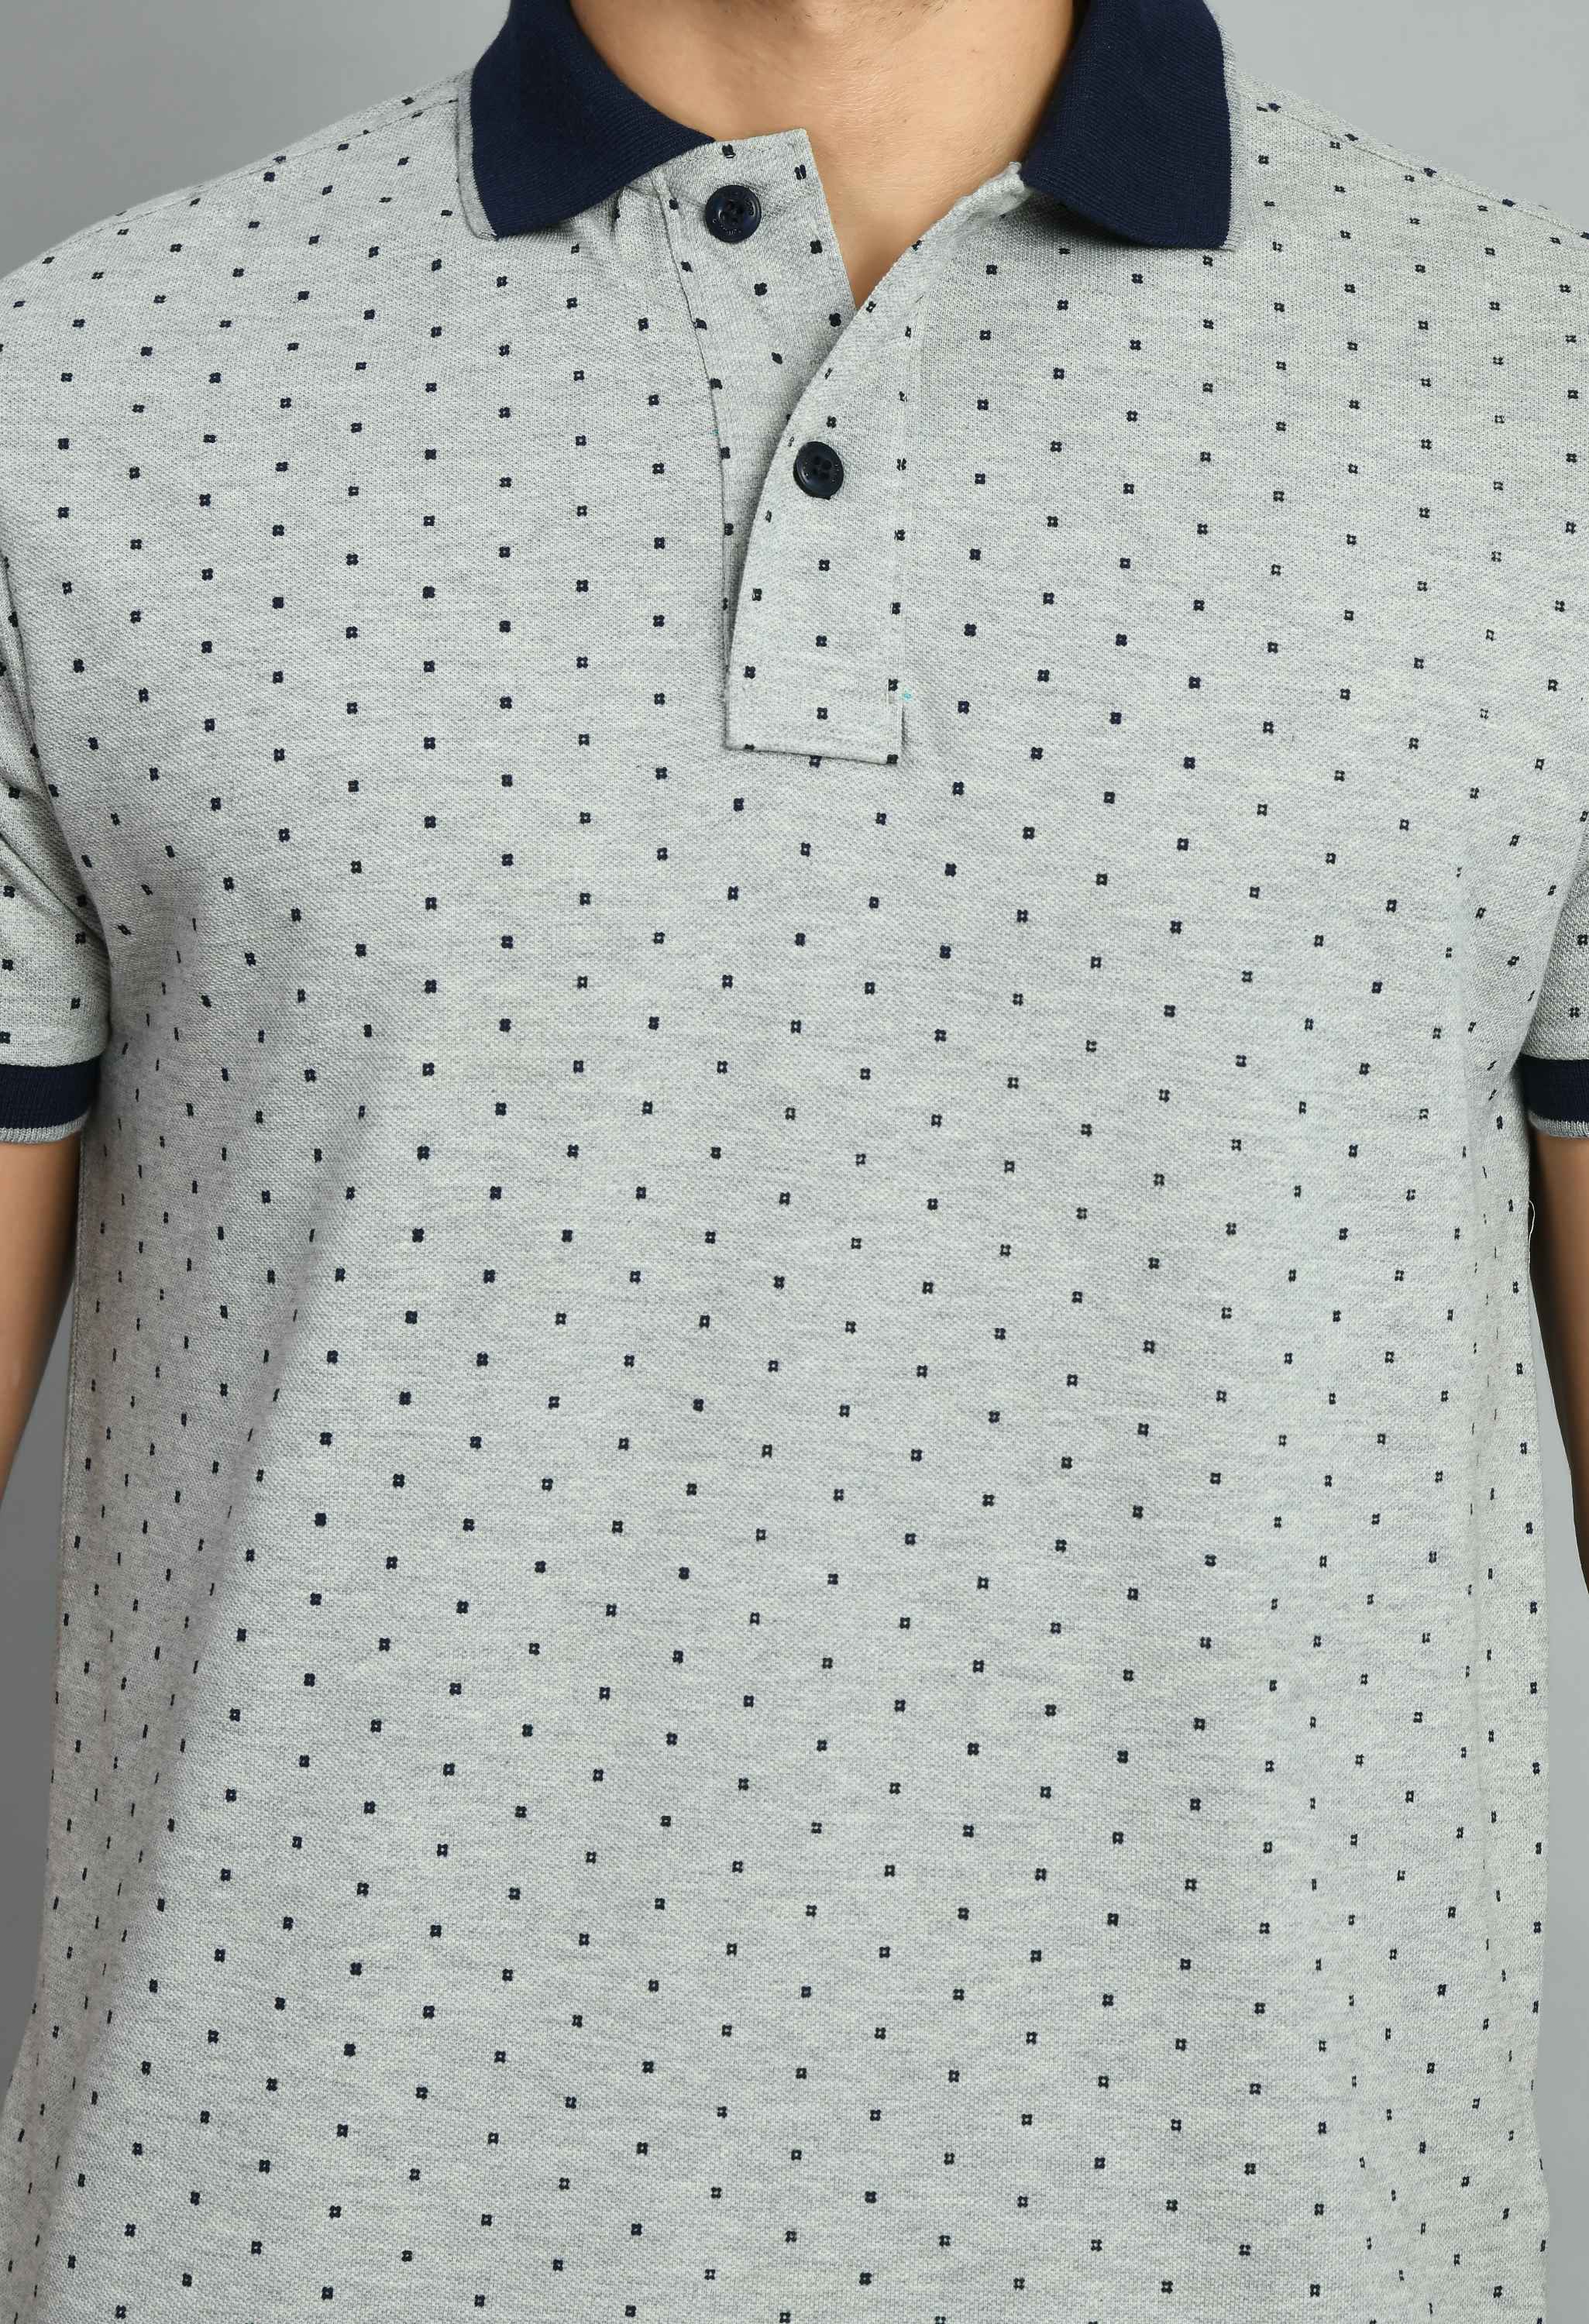 Men's Printed Gray Smart Fit Polo Tees - SQUIREHOOD